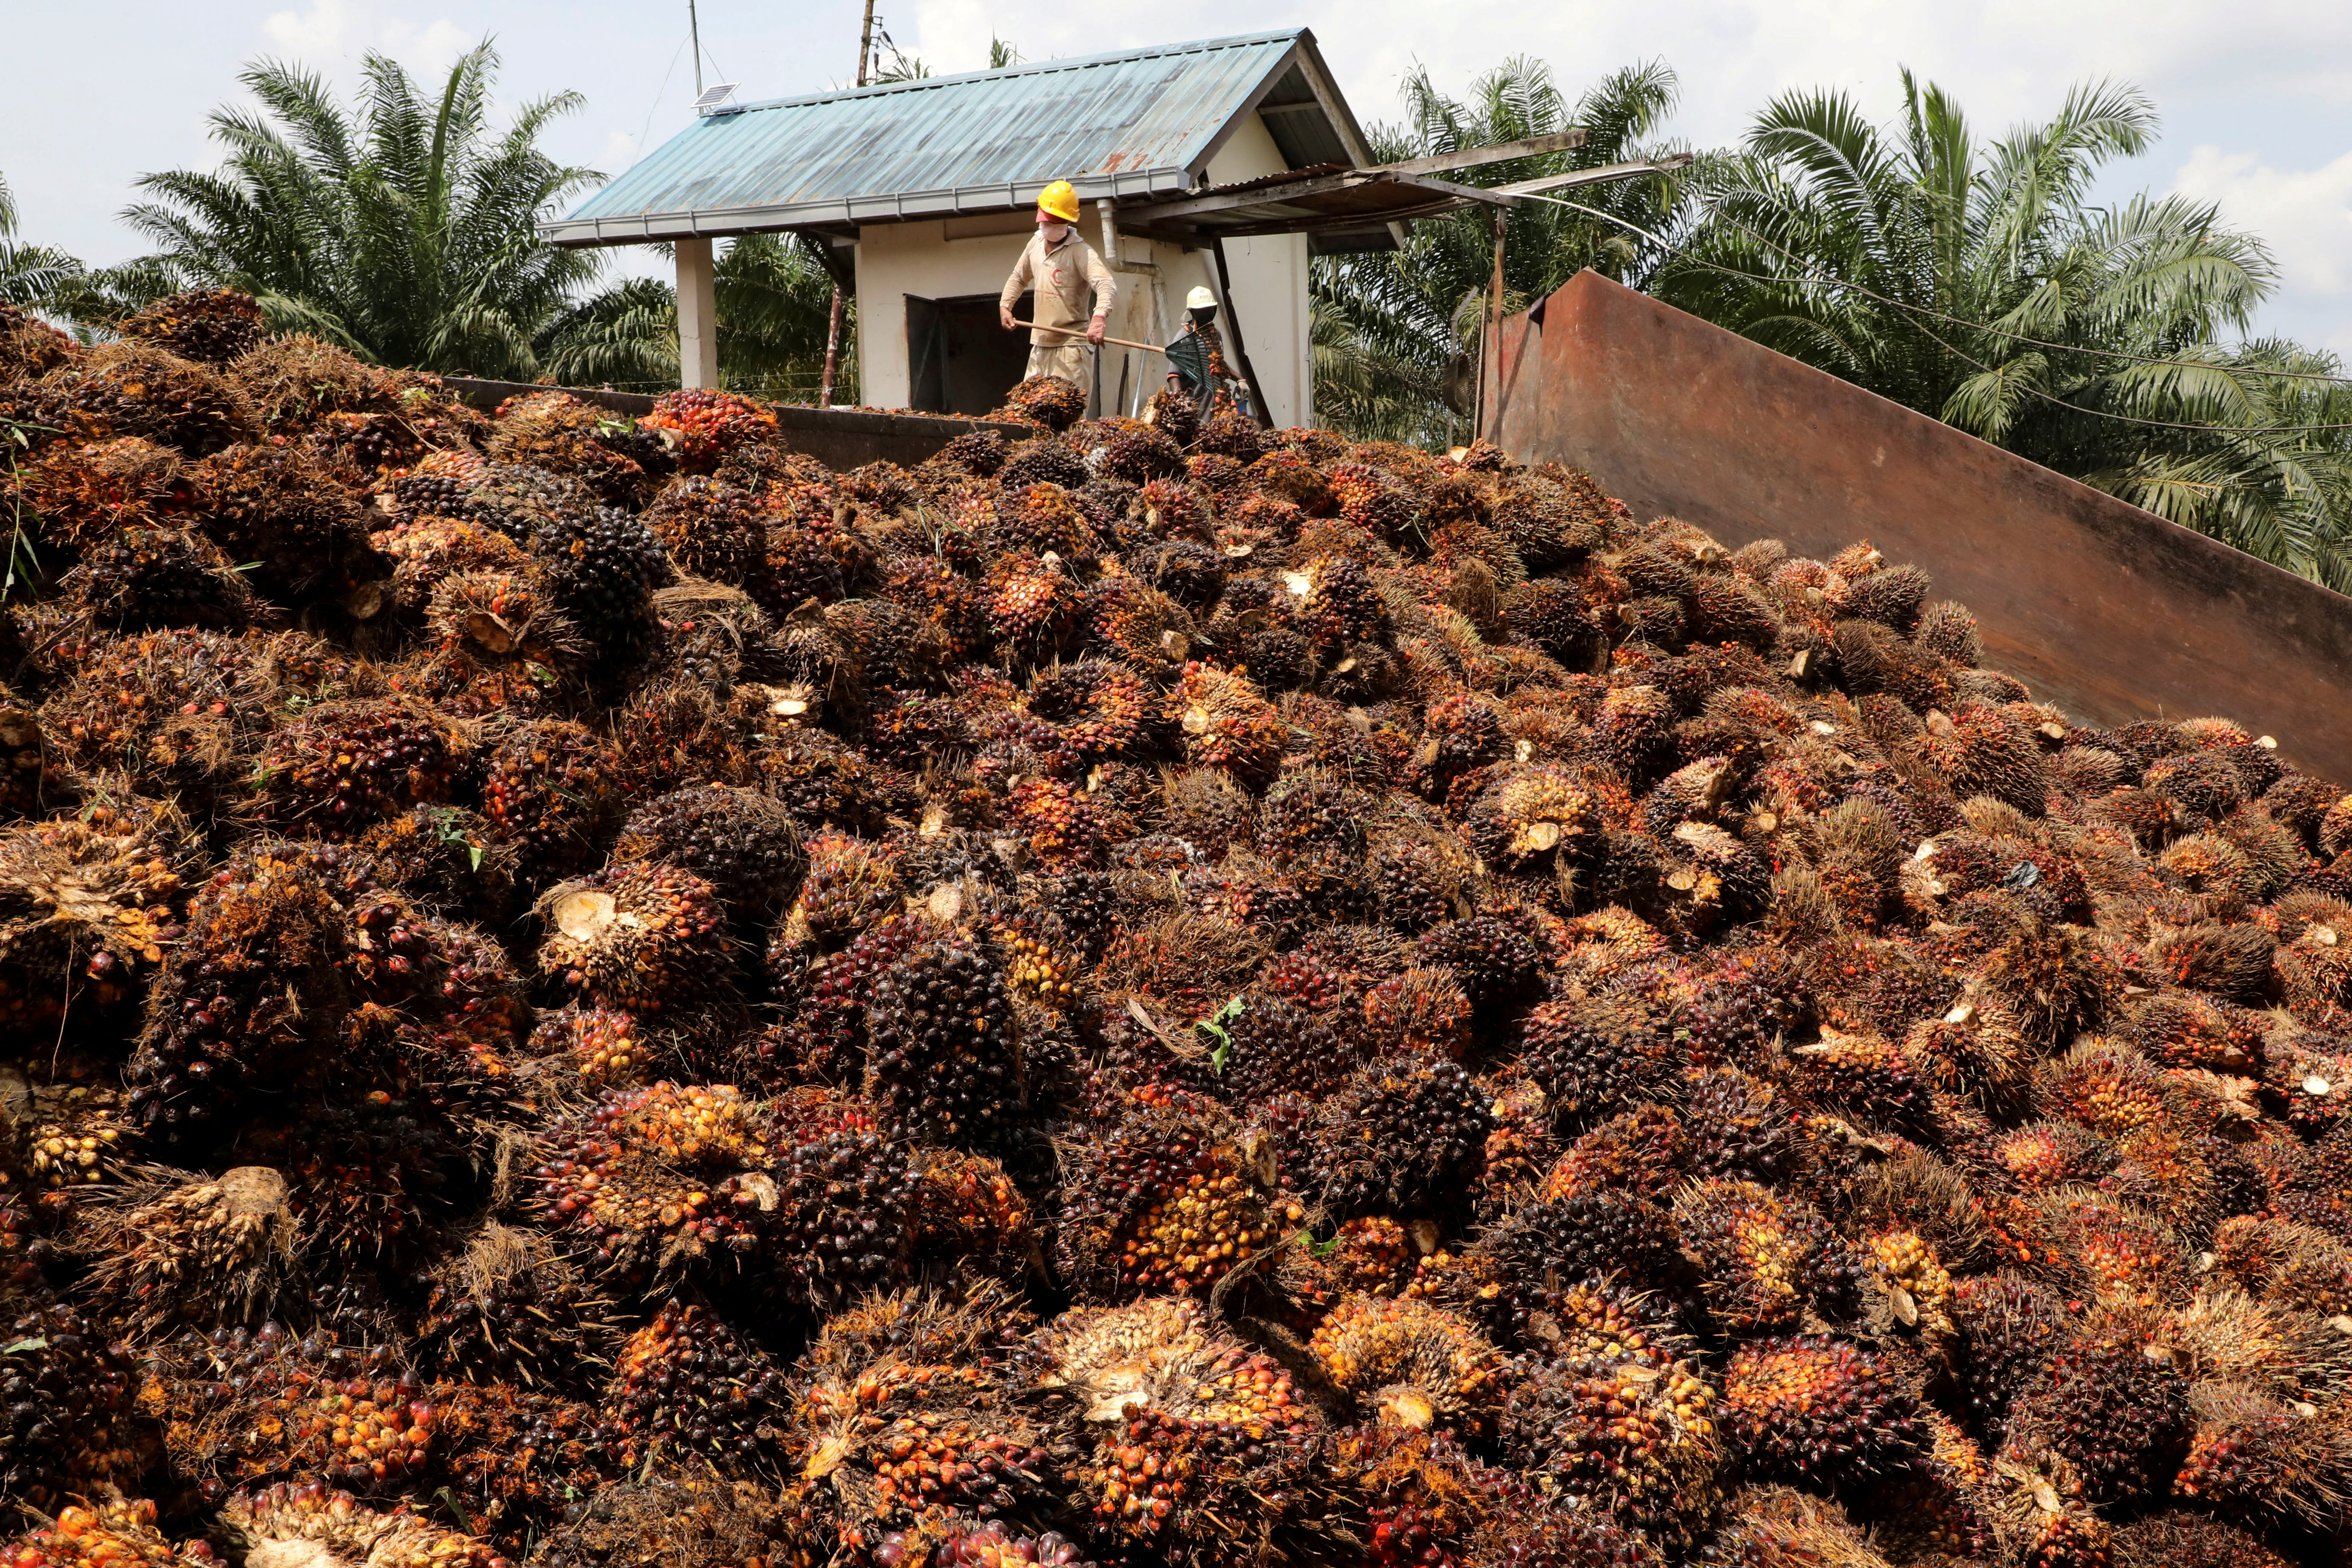 Workers handle palm oil fruits at a plantation in Slim River